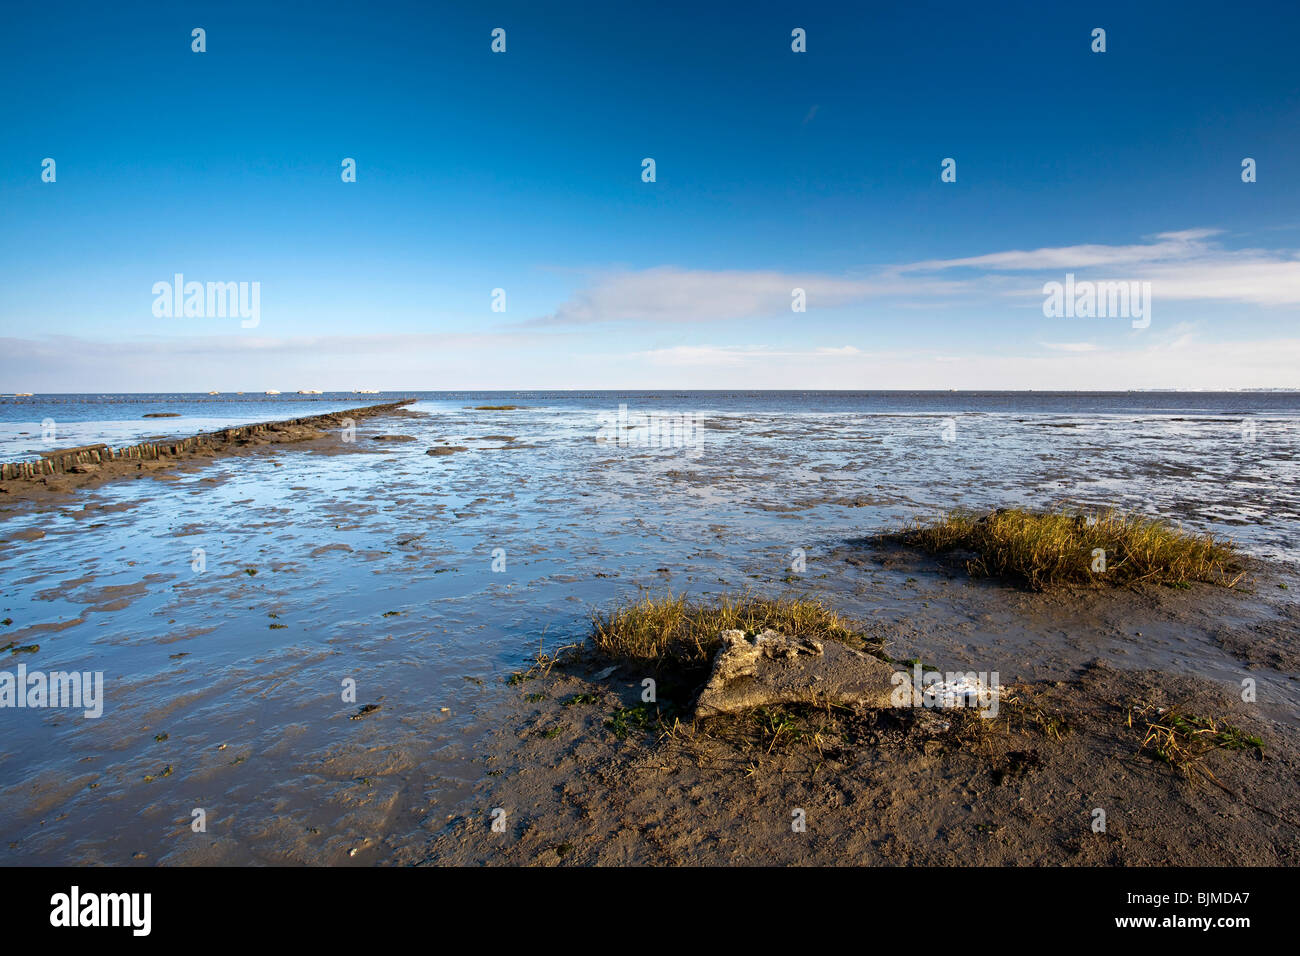 Mud-flats in Keitum, Sylt Island, Schleswig-Holstein, Germany, Europe Stock Photo